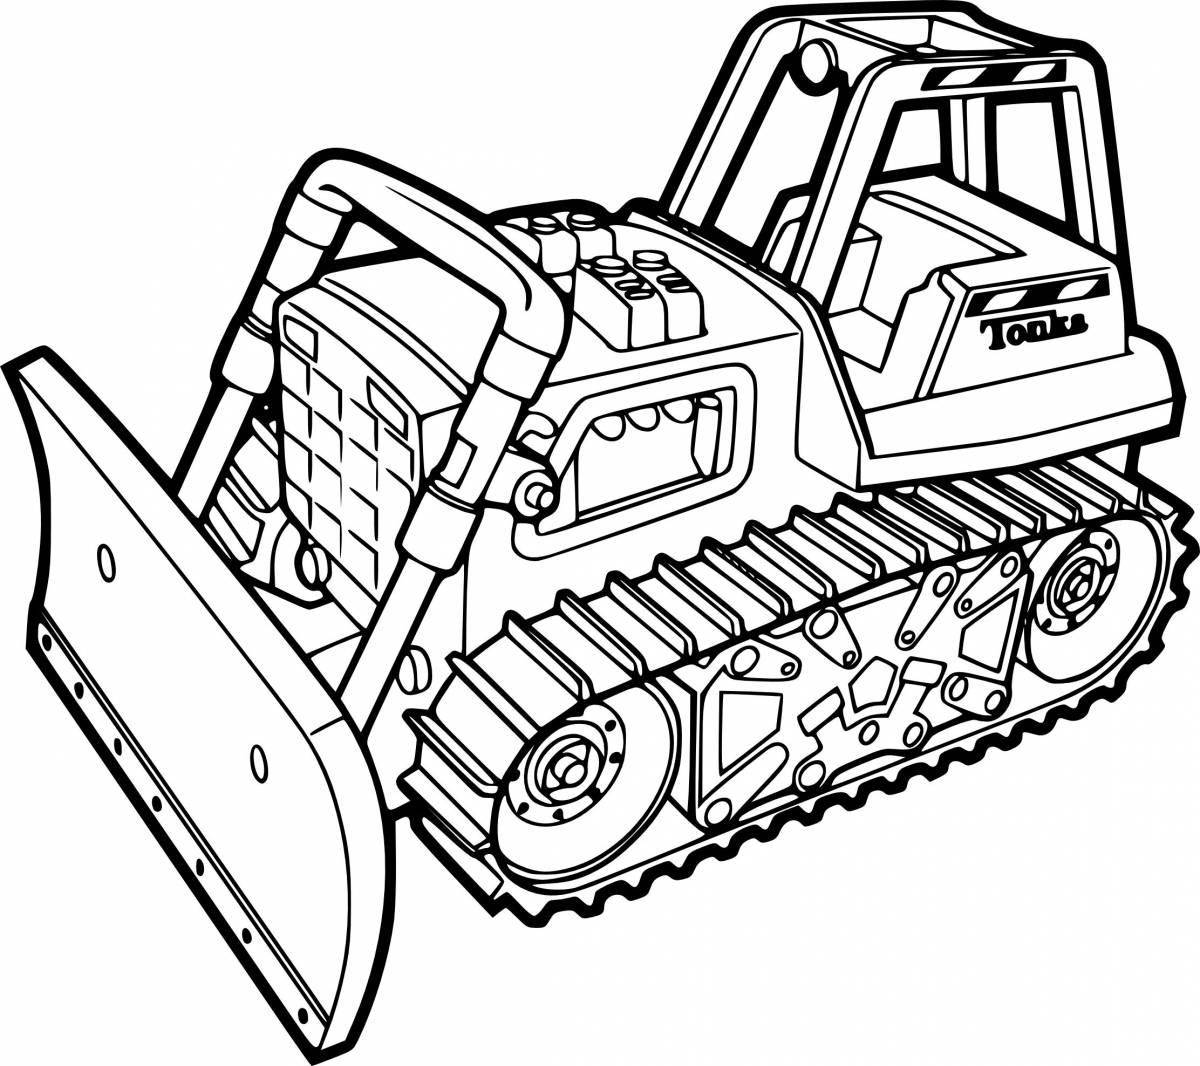 Playful bulldozer coloring page for toddlers